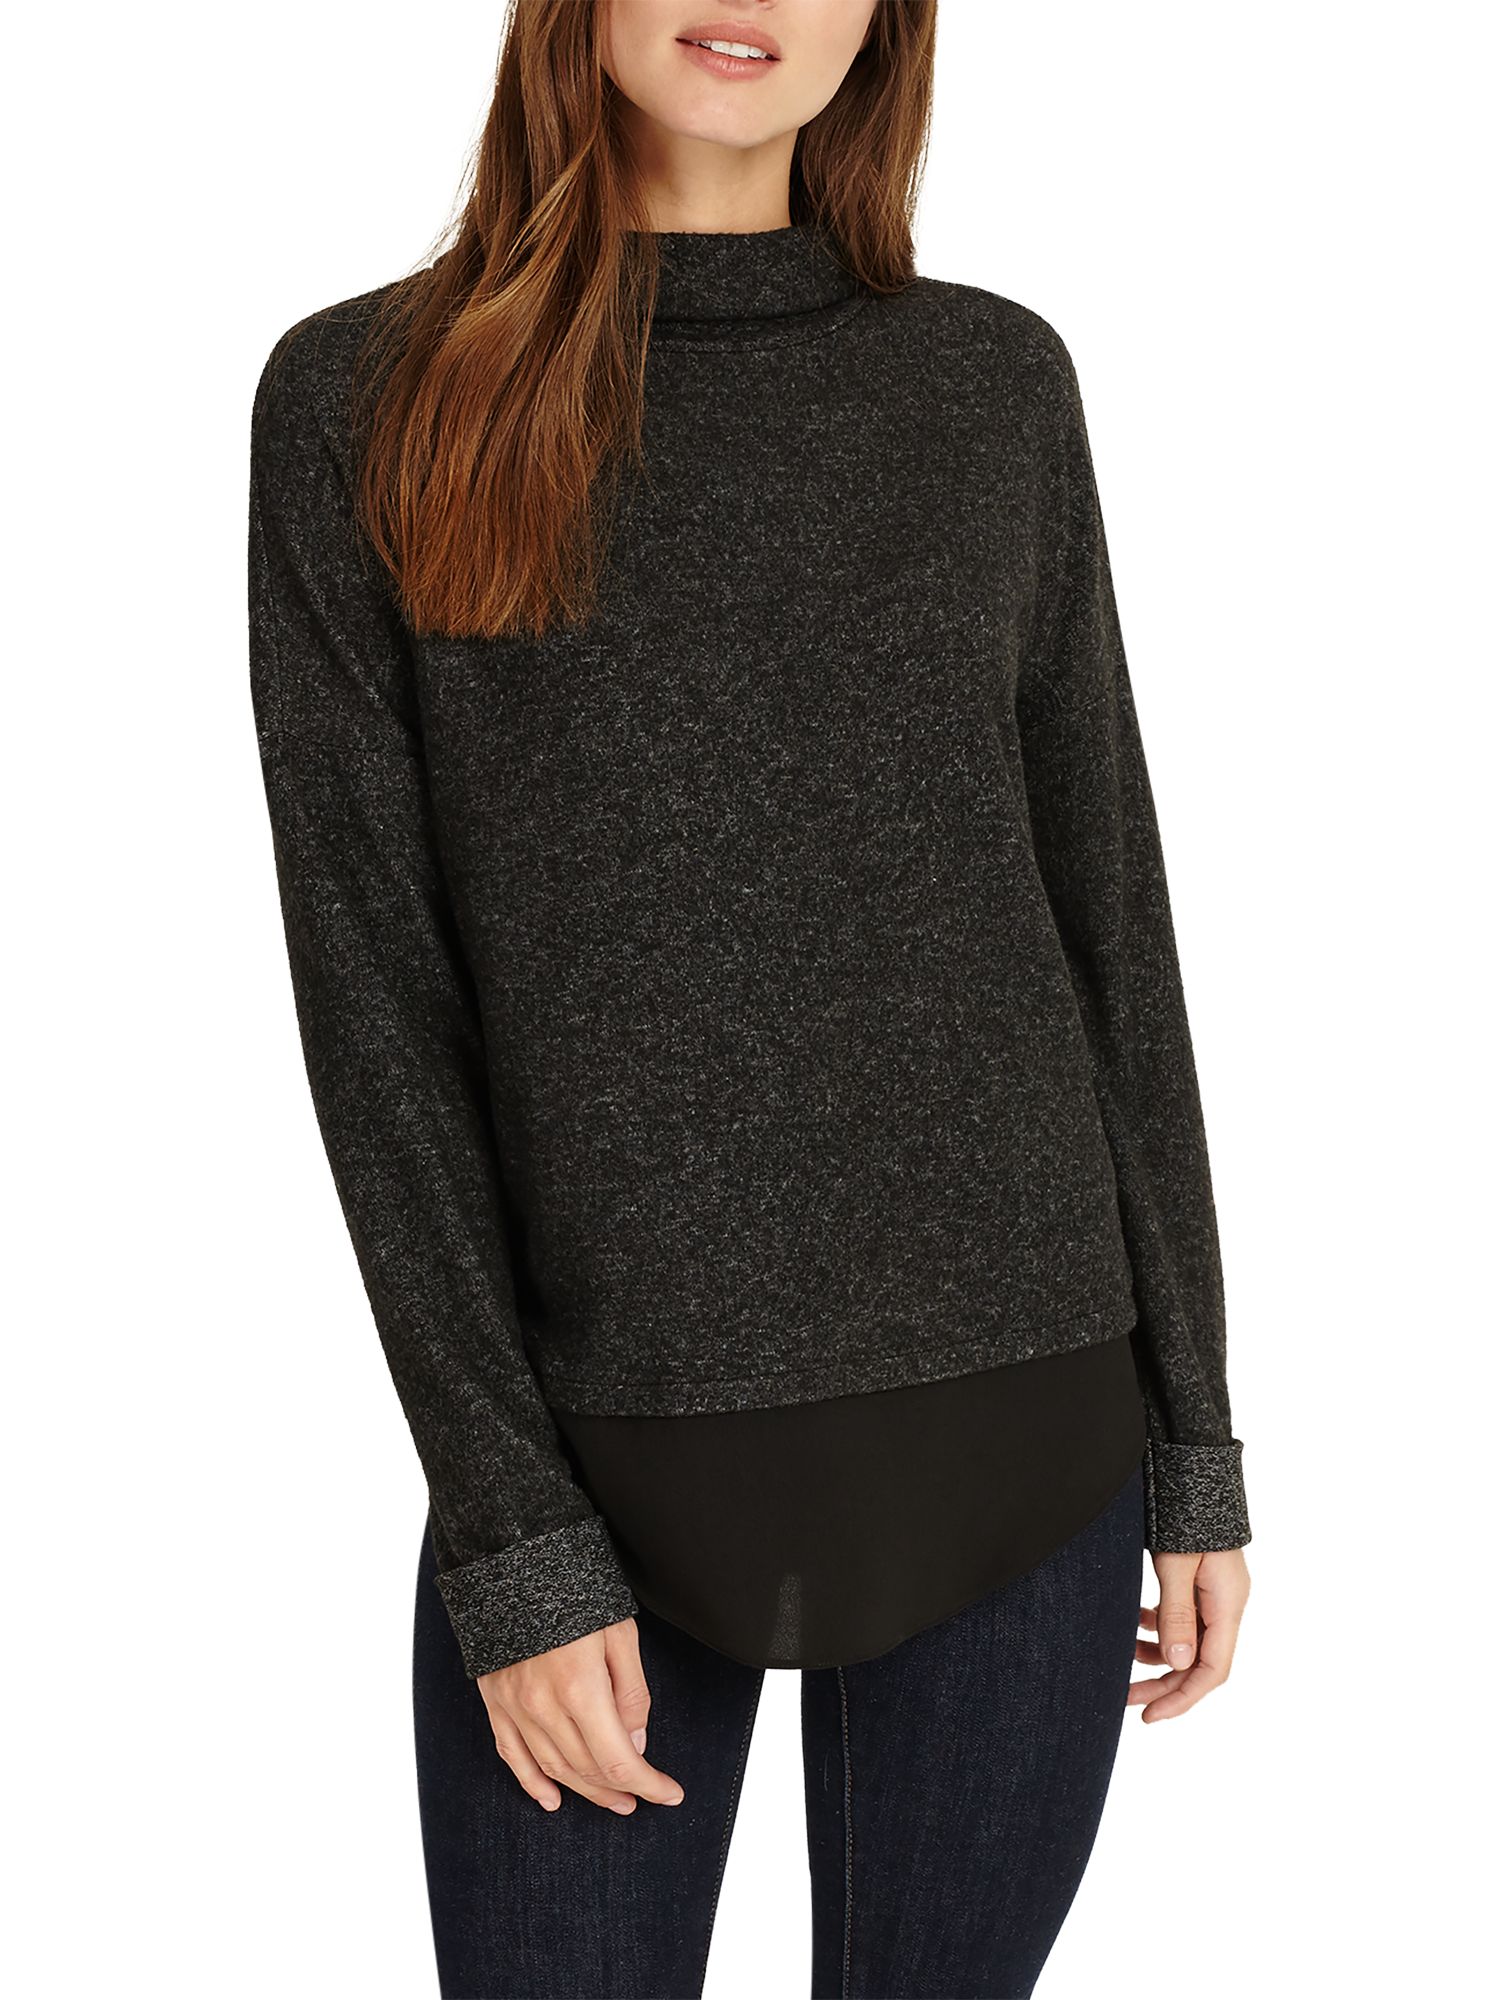 Phase Eight Serena Snuggle Top, Charcoal